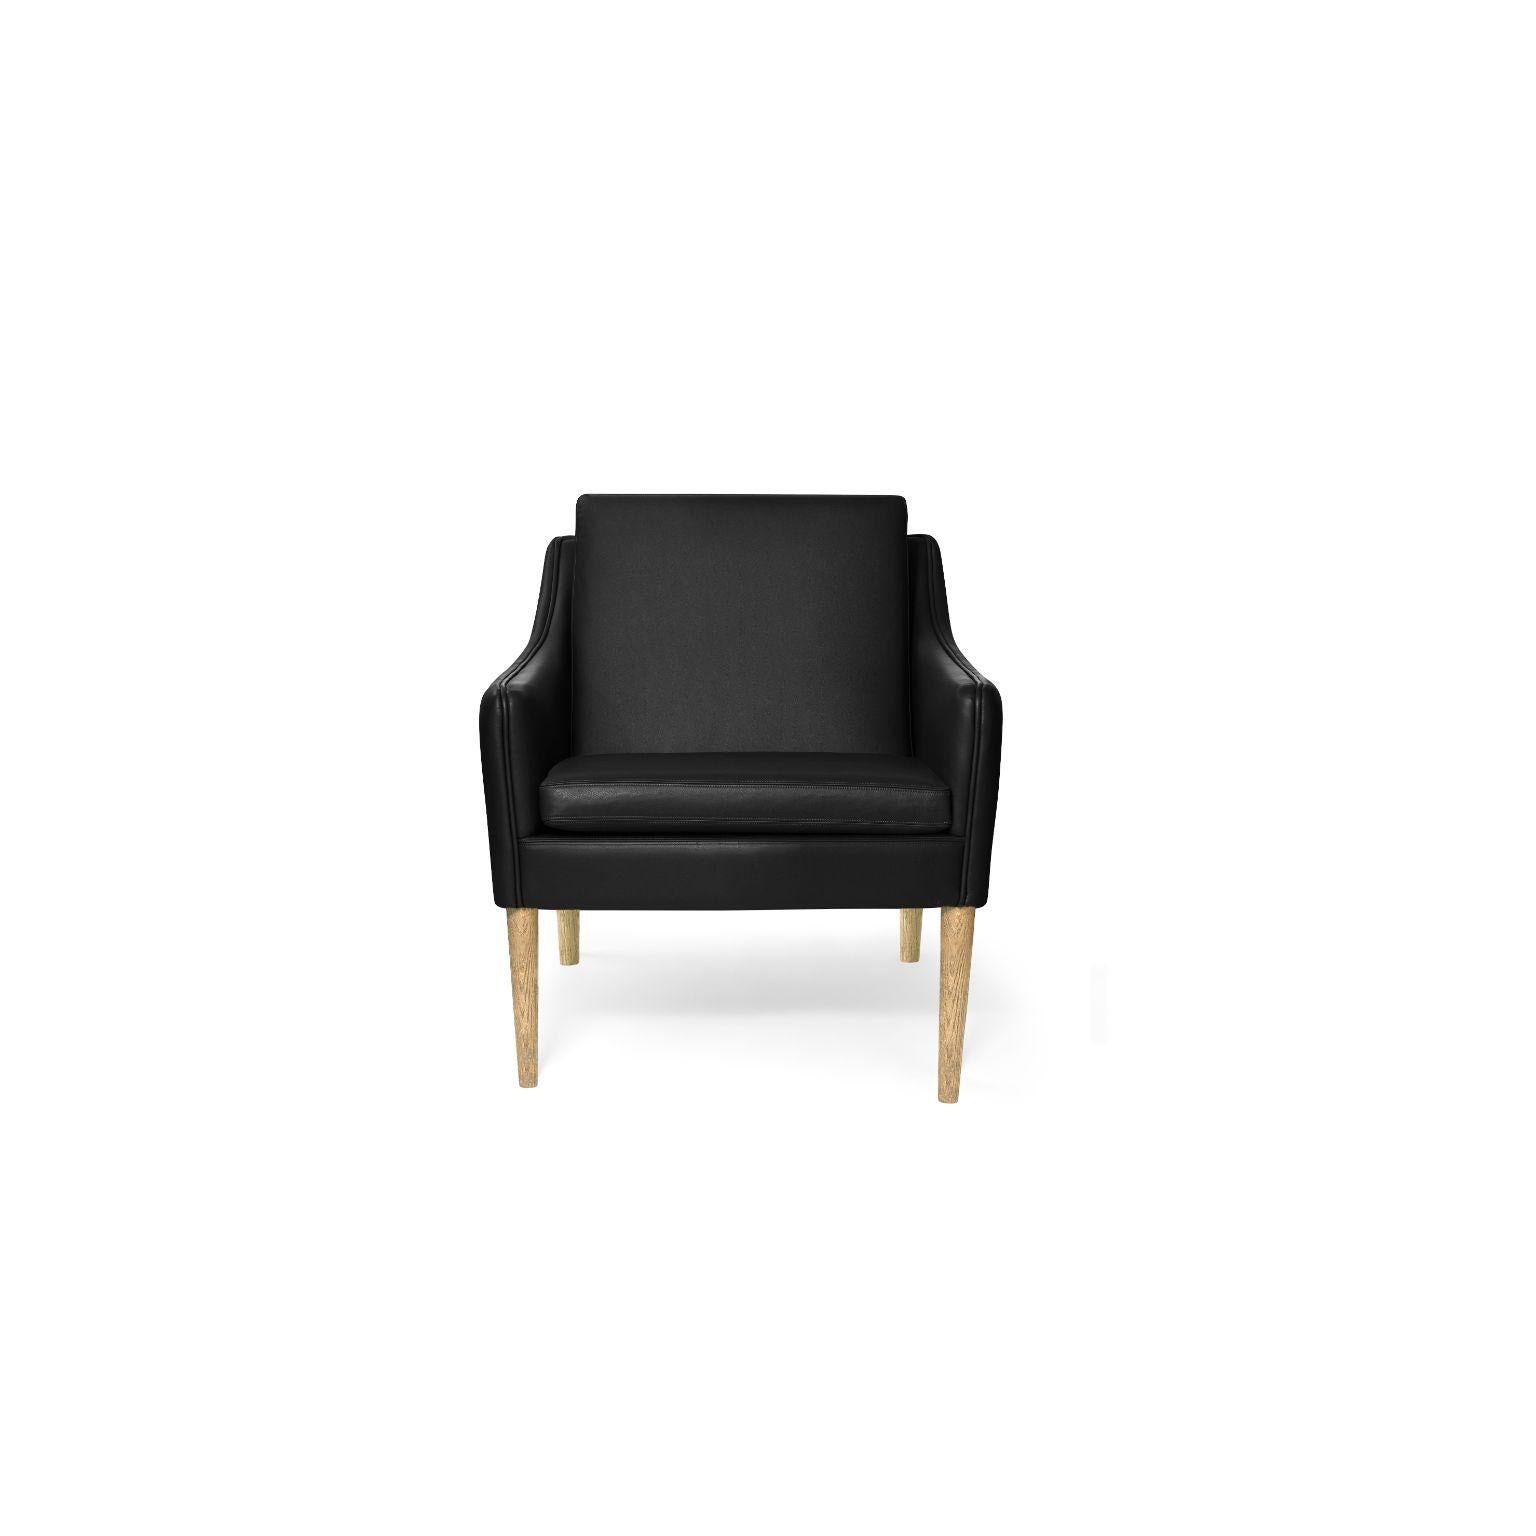 Mr. Olsen lounge chair solid smoked oak black leather by Warm Nordic
Dimensions: D 81 x W 79 x H 78 cm
Material: Textile upholstery, foam, spring system, oak, leather
Weight: 27 kg
Also available in different colours, materials and